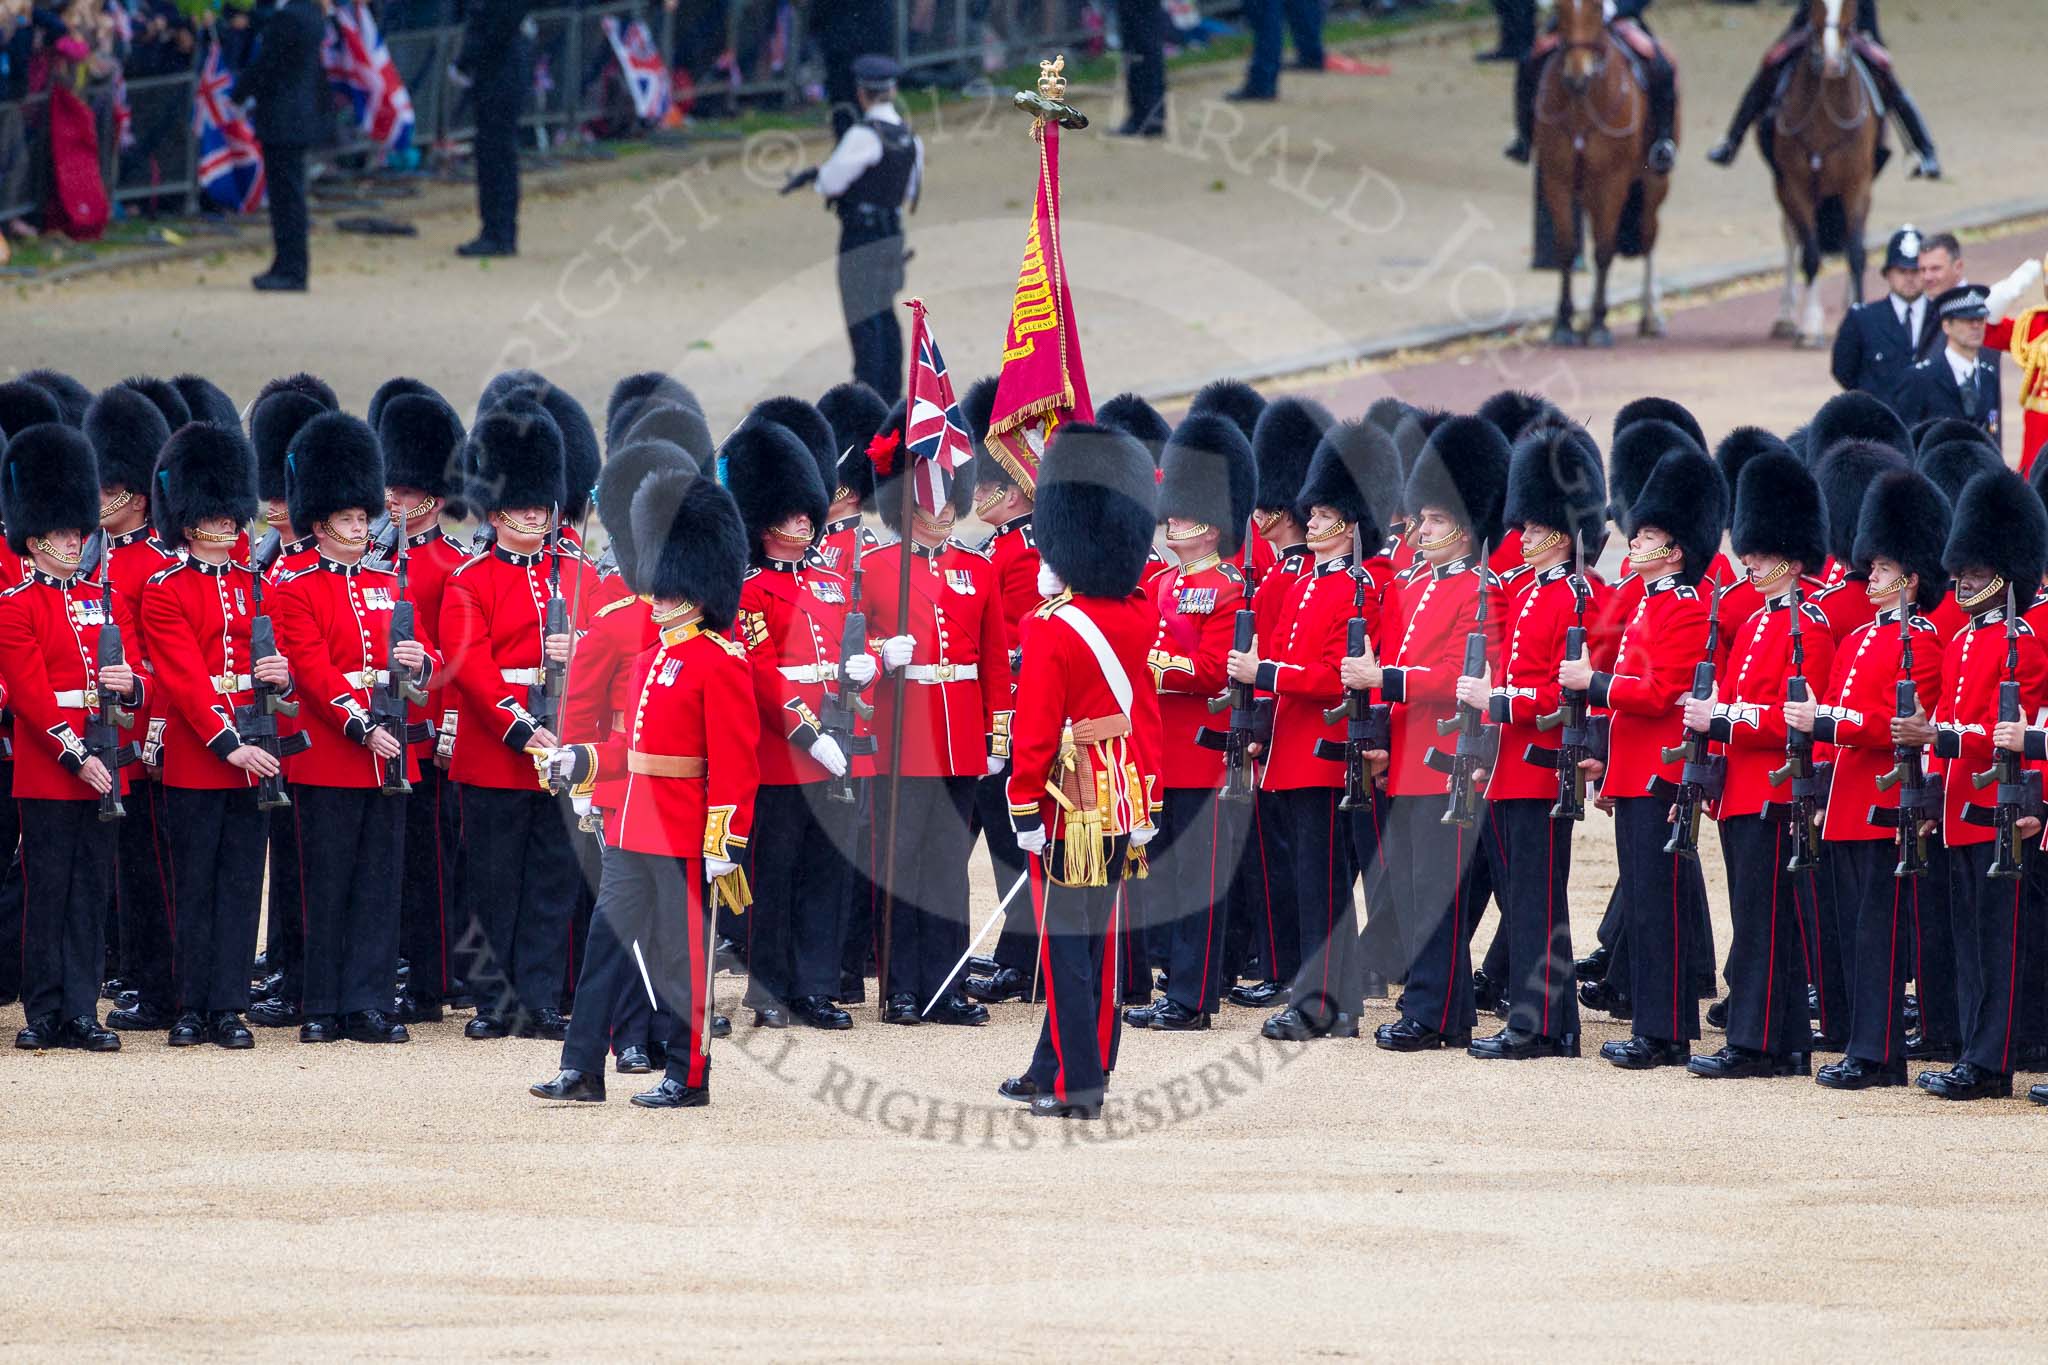 Trooping the Colour 2012: The Colour has been trooped along No. 6 Guard, F Company Scots Guards, on the right hand side of Horse Guards Parade, and the Ensign now turns to the left, to troop the Colour along No. 5 to No. 2 Guard..
Horse Guards Parade, Westminster,
London SW1,

United Kingdom,
on 16 June 2012 at 11:26, image #343